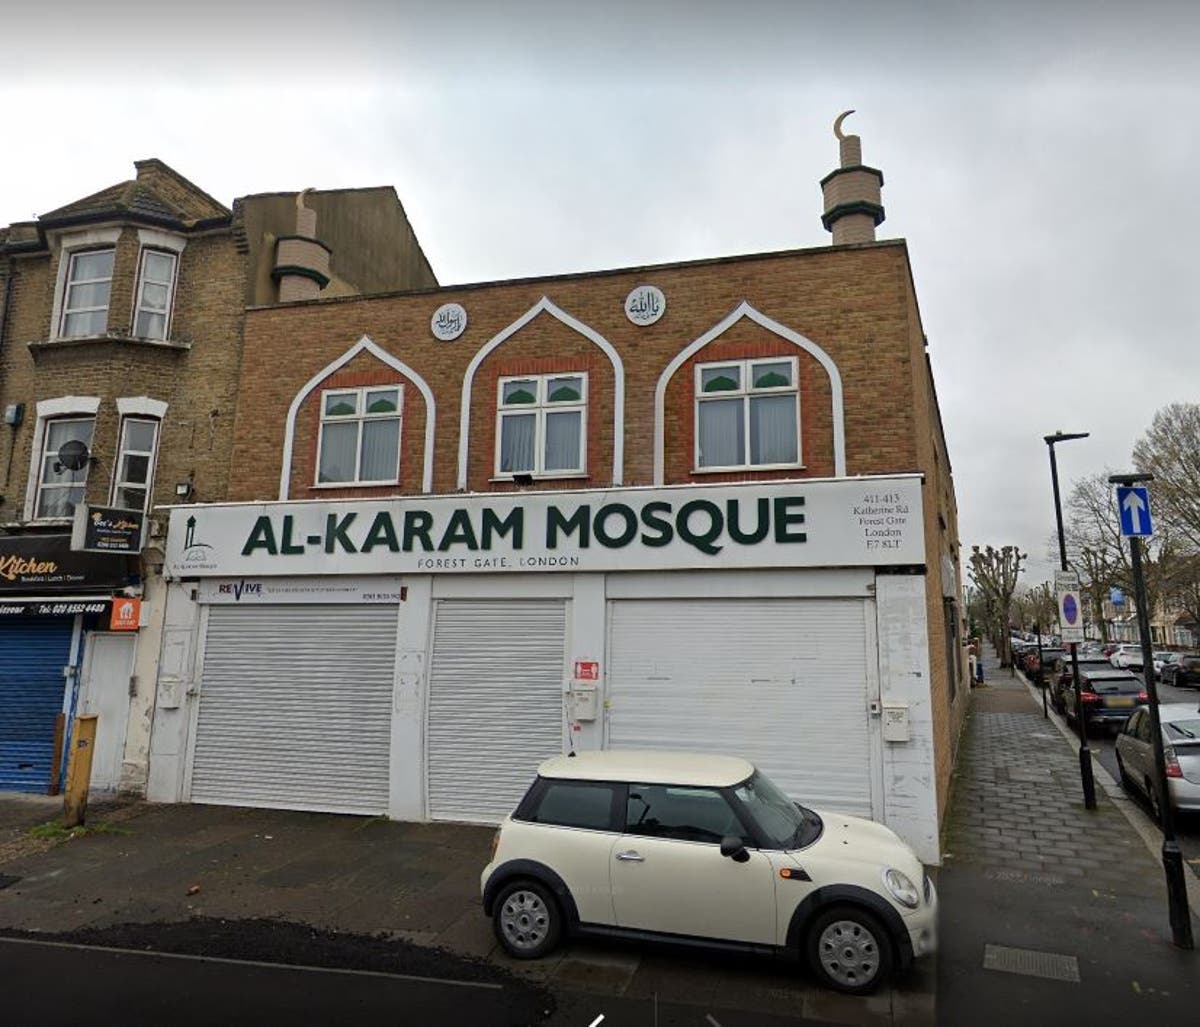 Newham imam violently attacked in Al Karam Mosque by 'man who claimed he was there to pray'